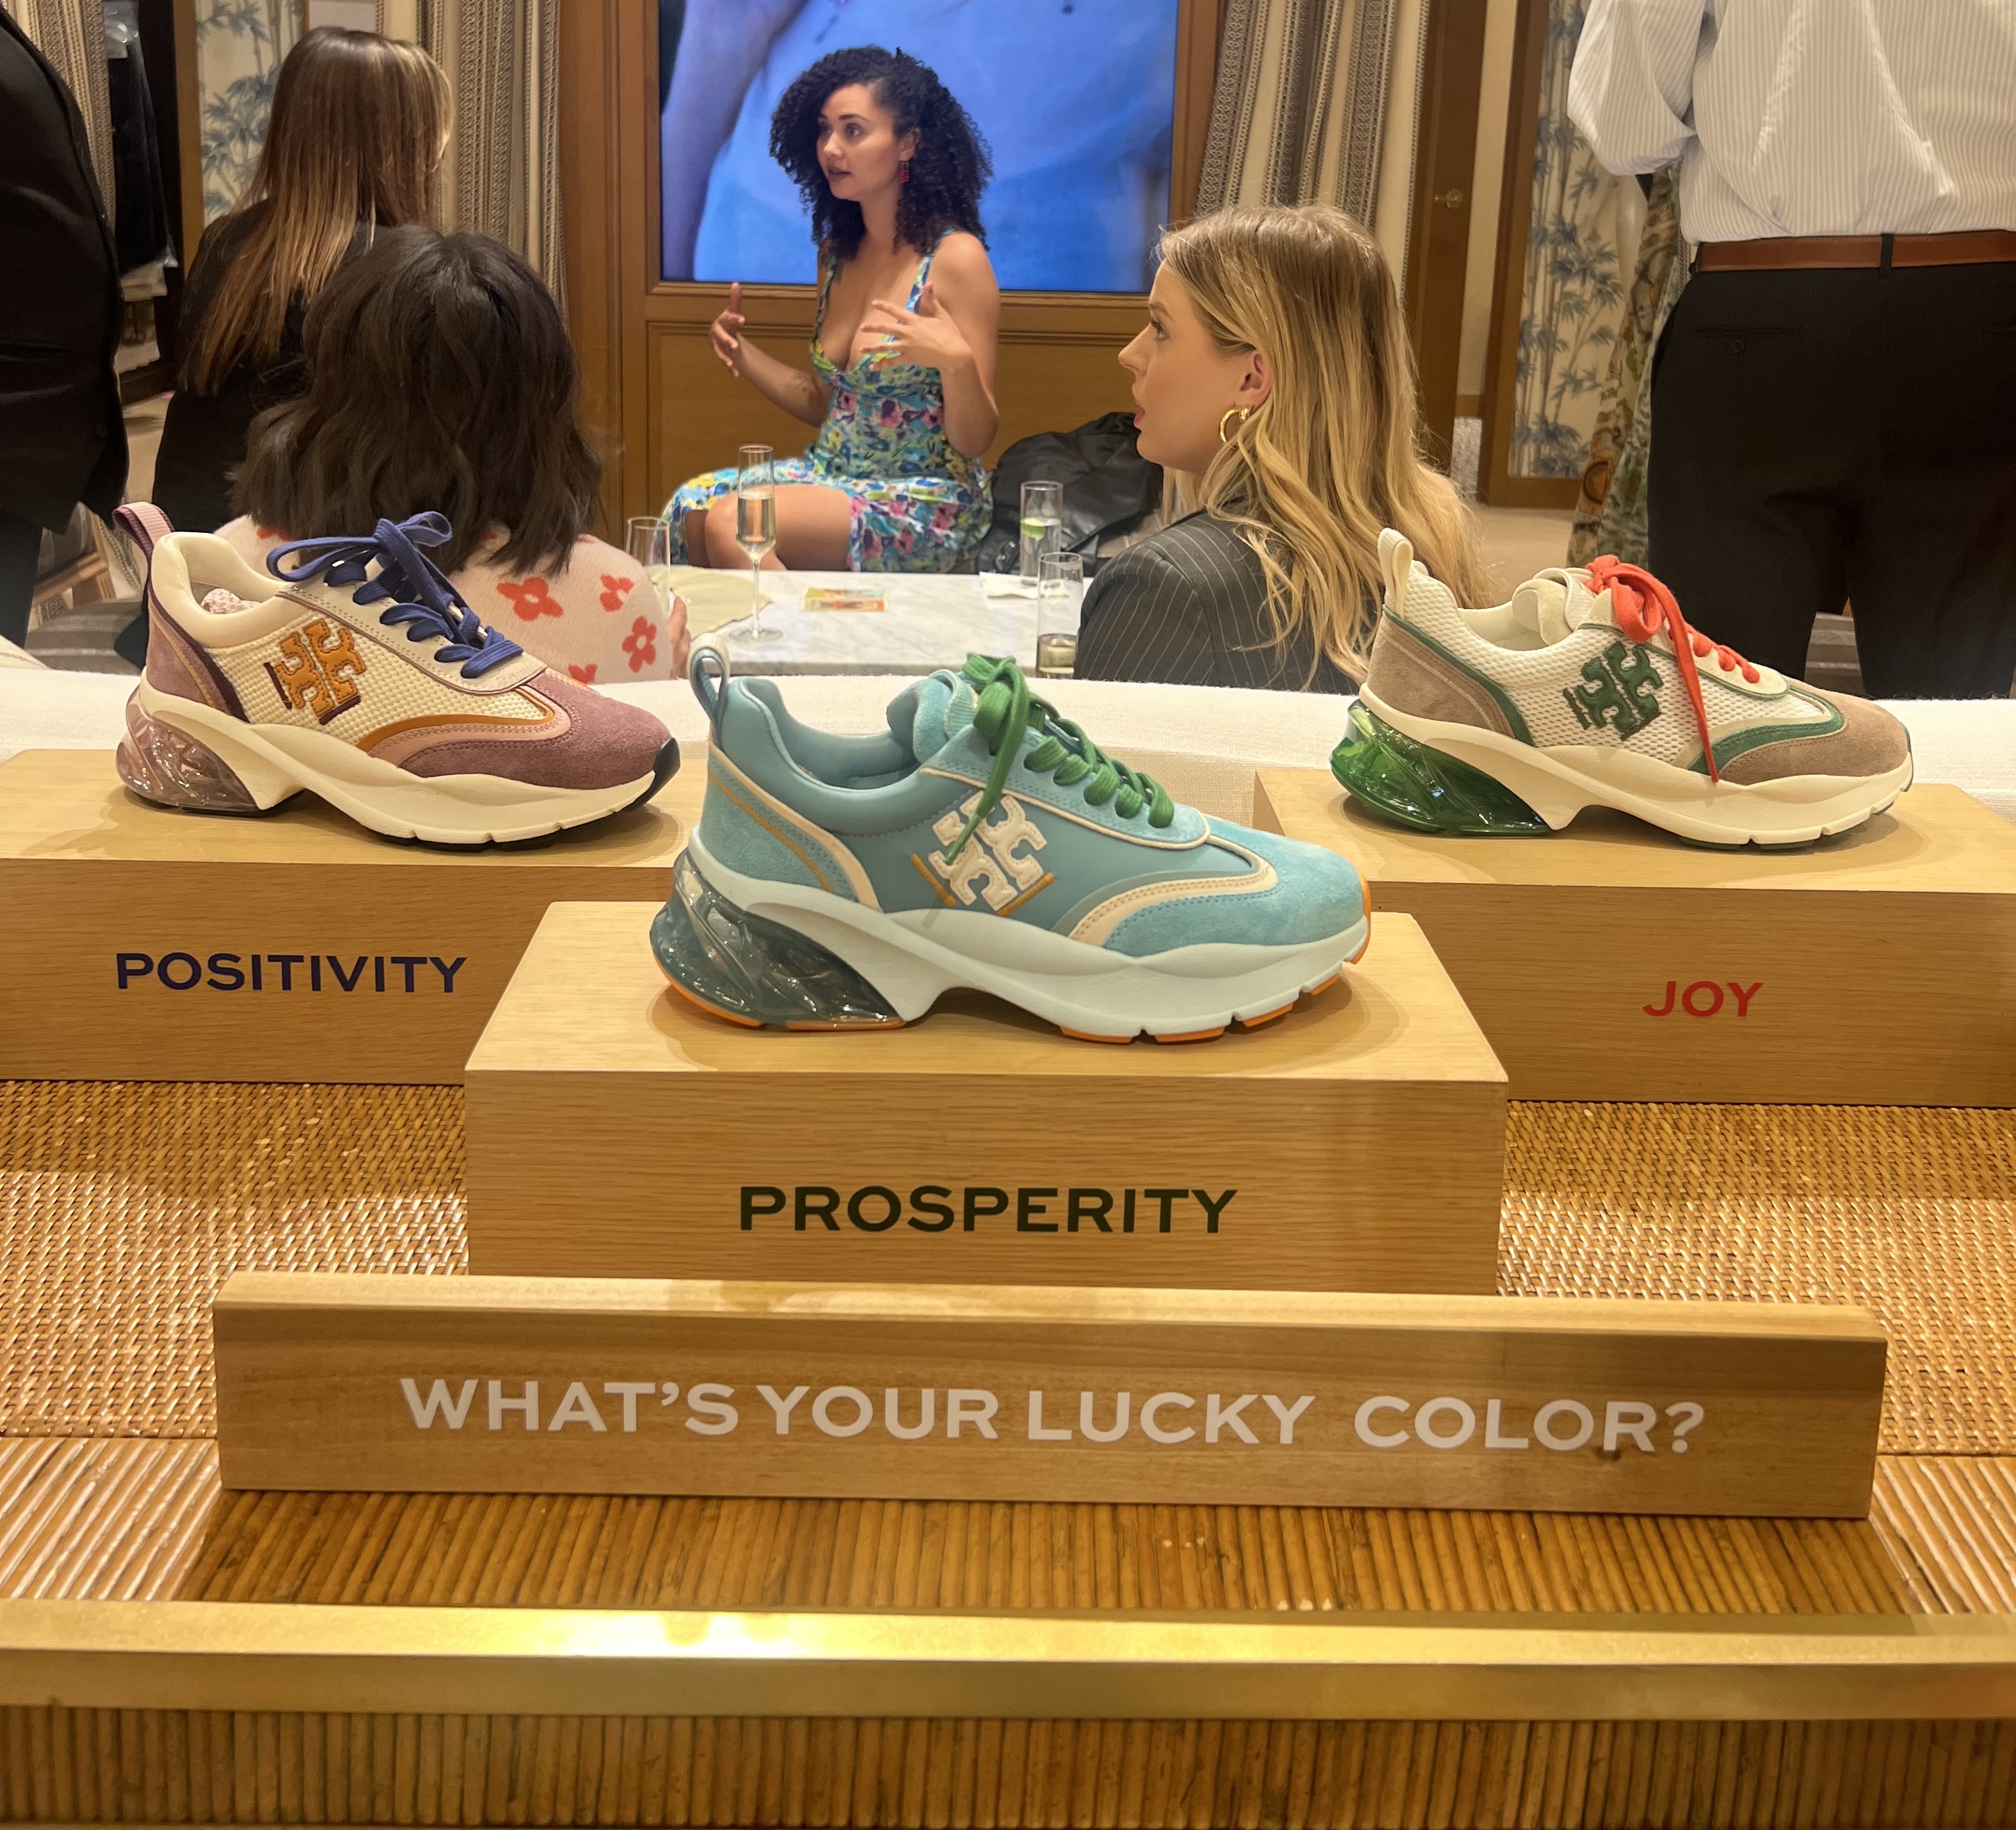 Tory Burch Brings “Good Luck” to Highland Park Village! – SMU Look